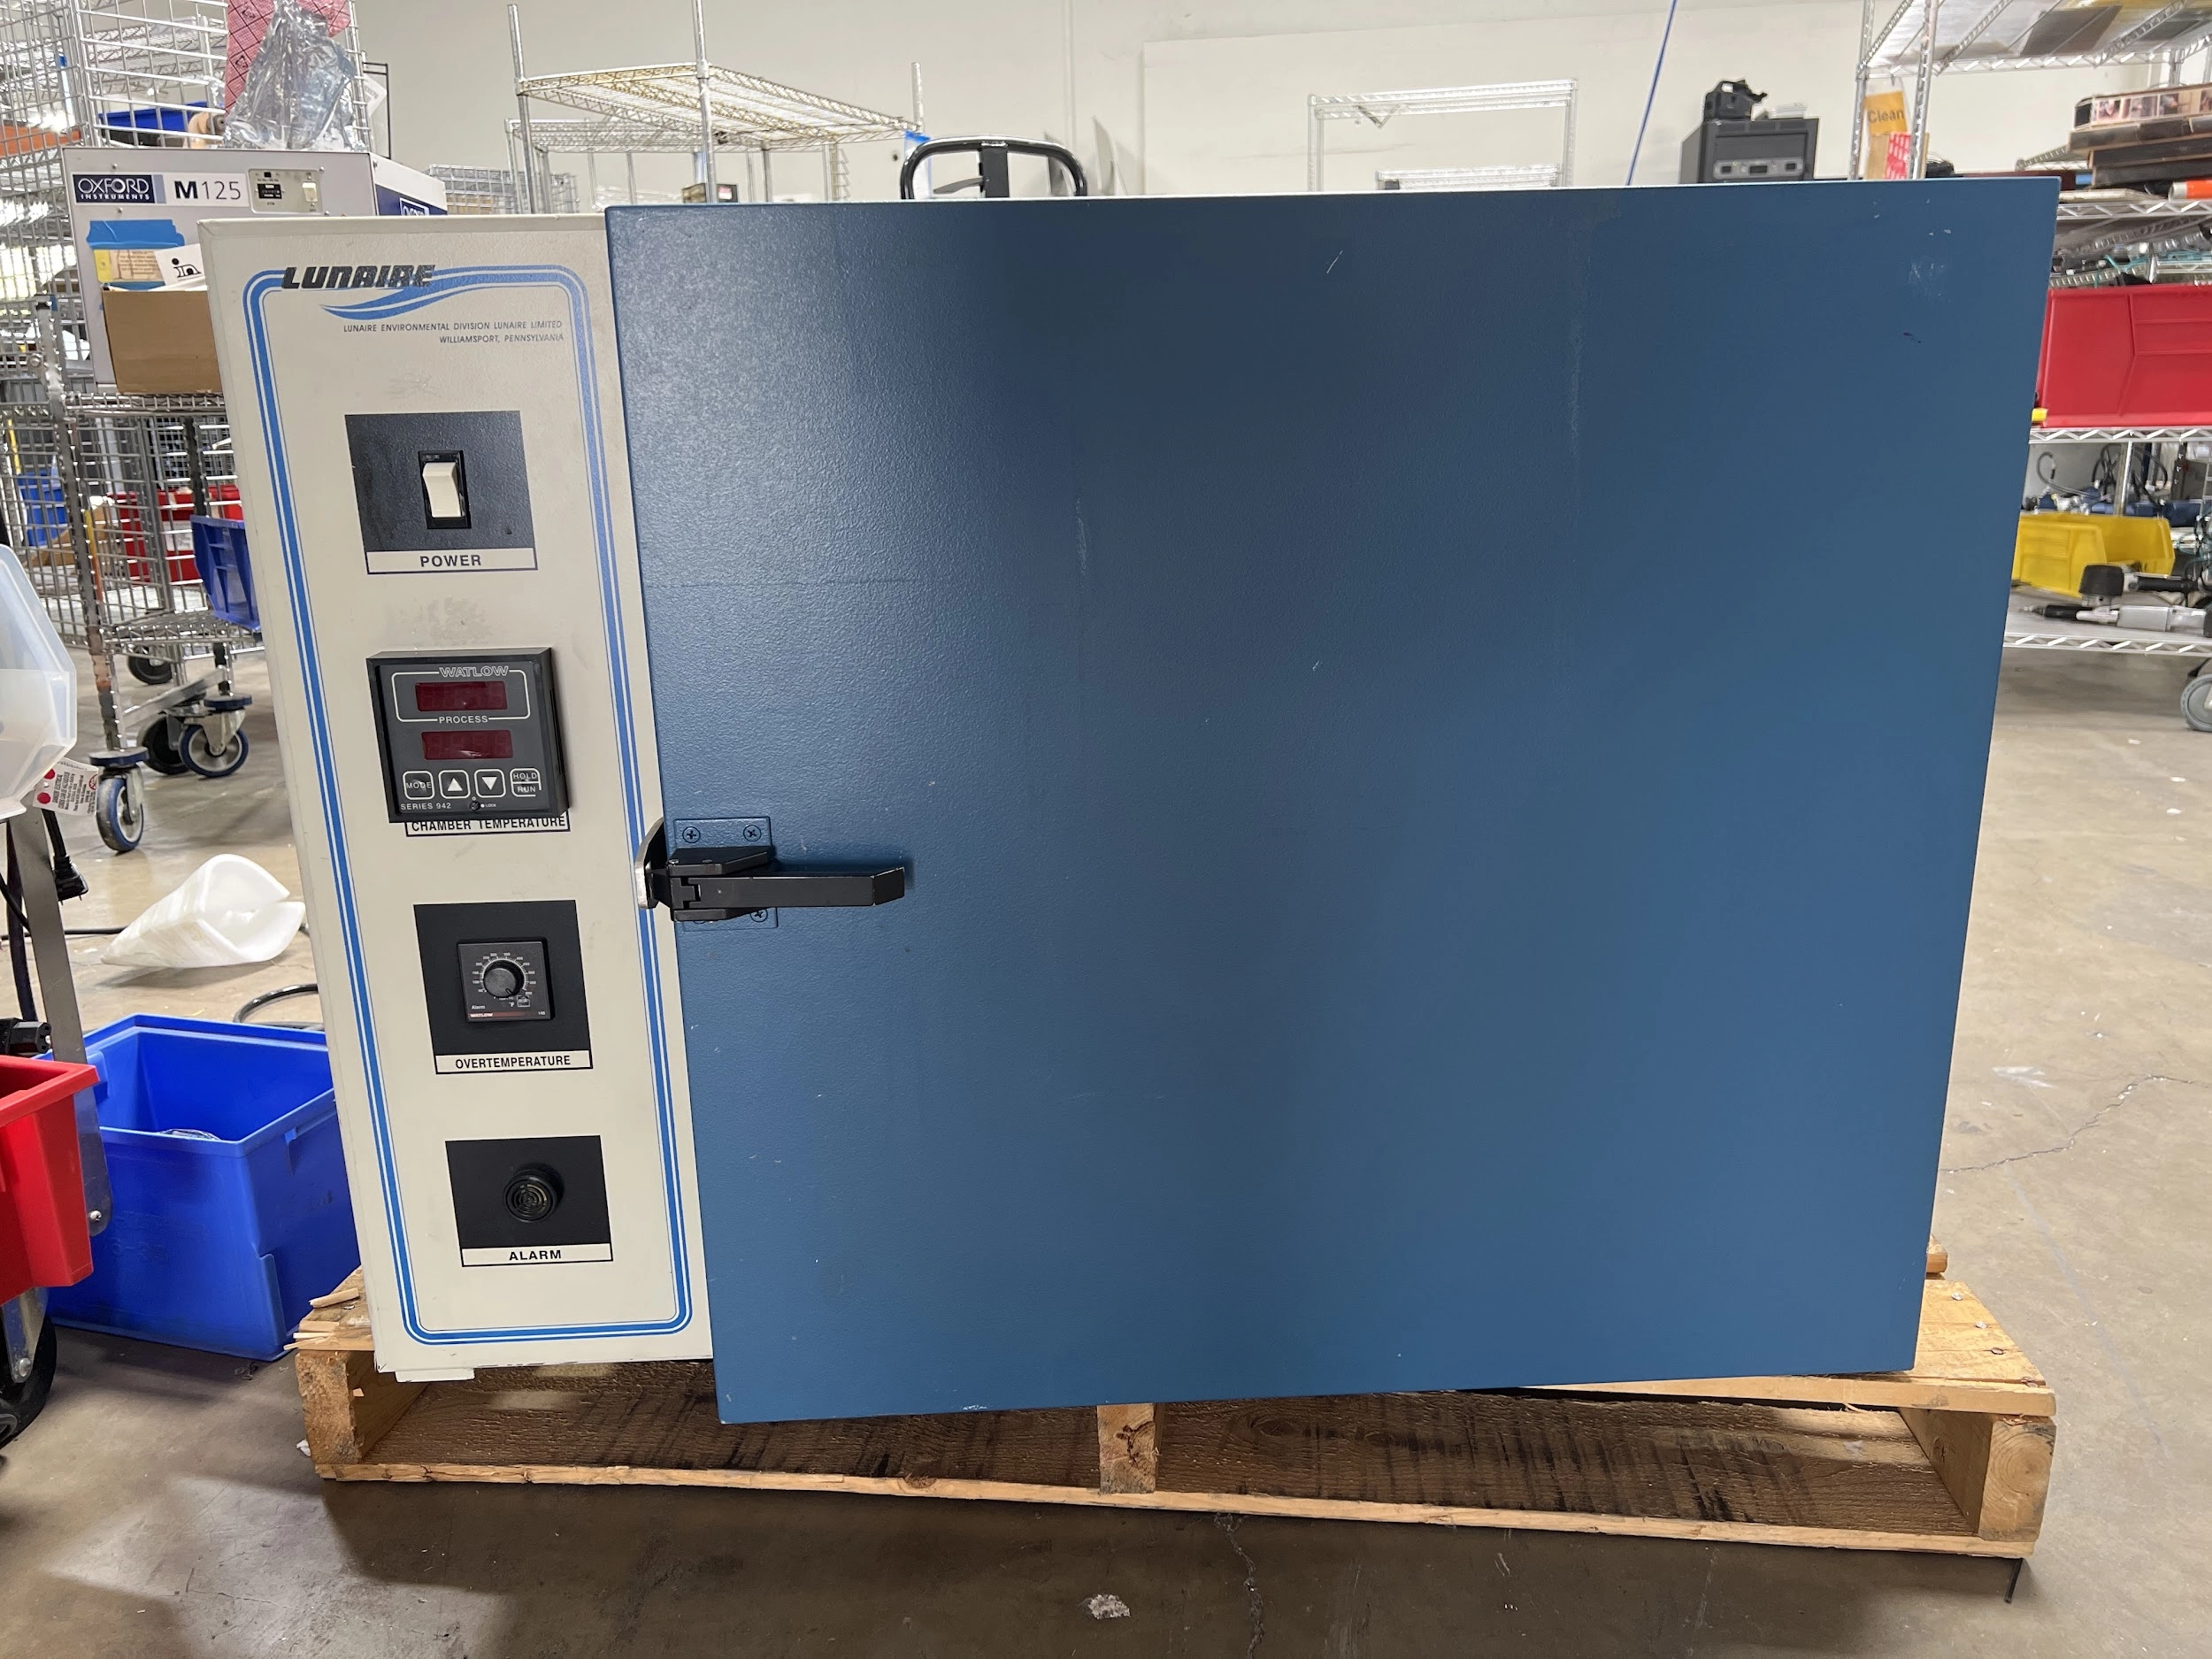 Lunaire CE205 Industrial Chamber Oven - Heat Up Issues